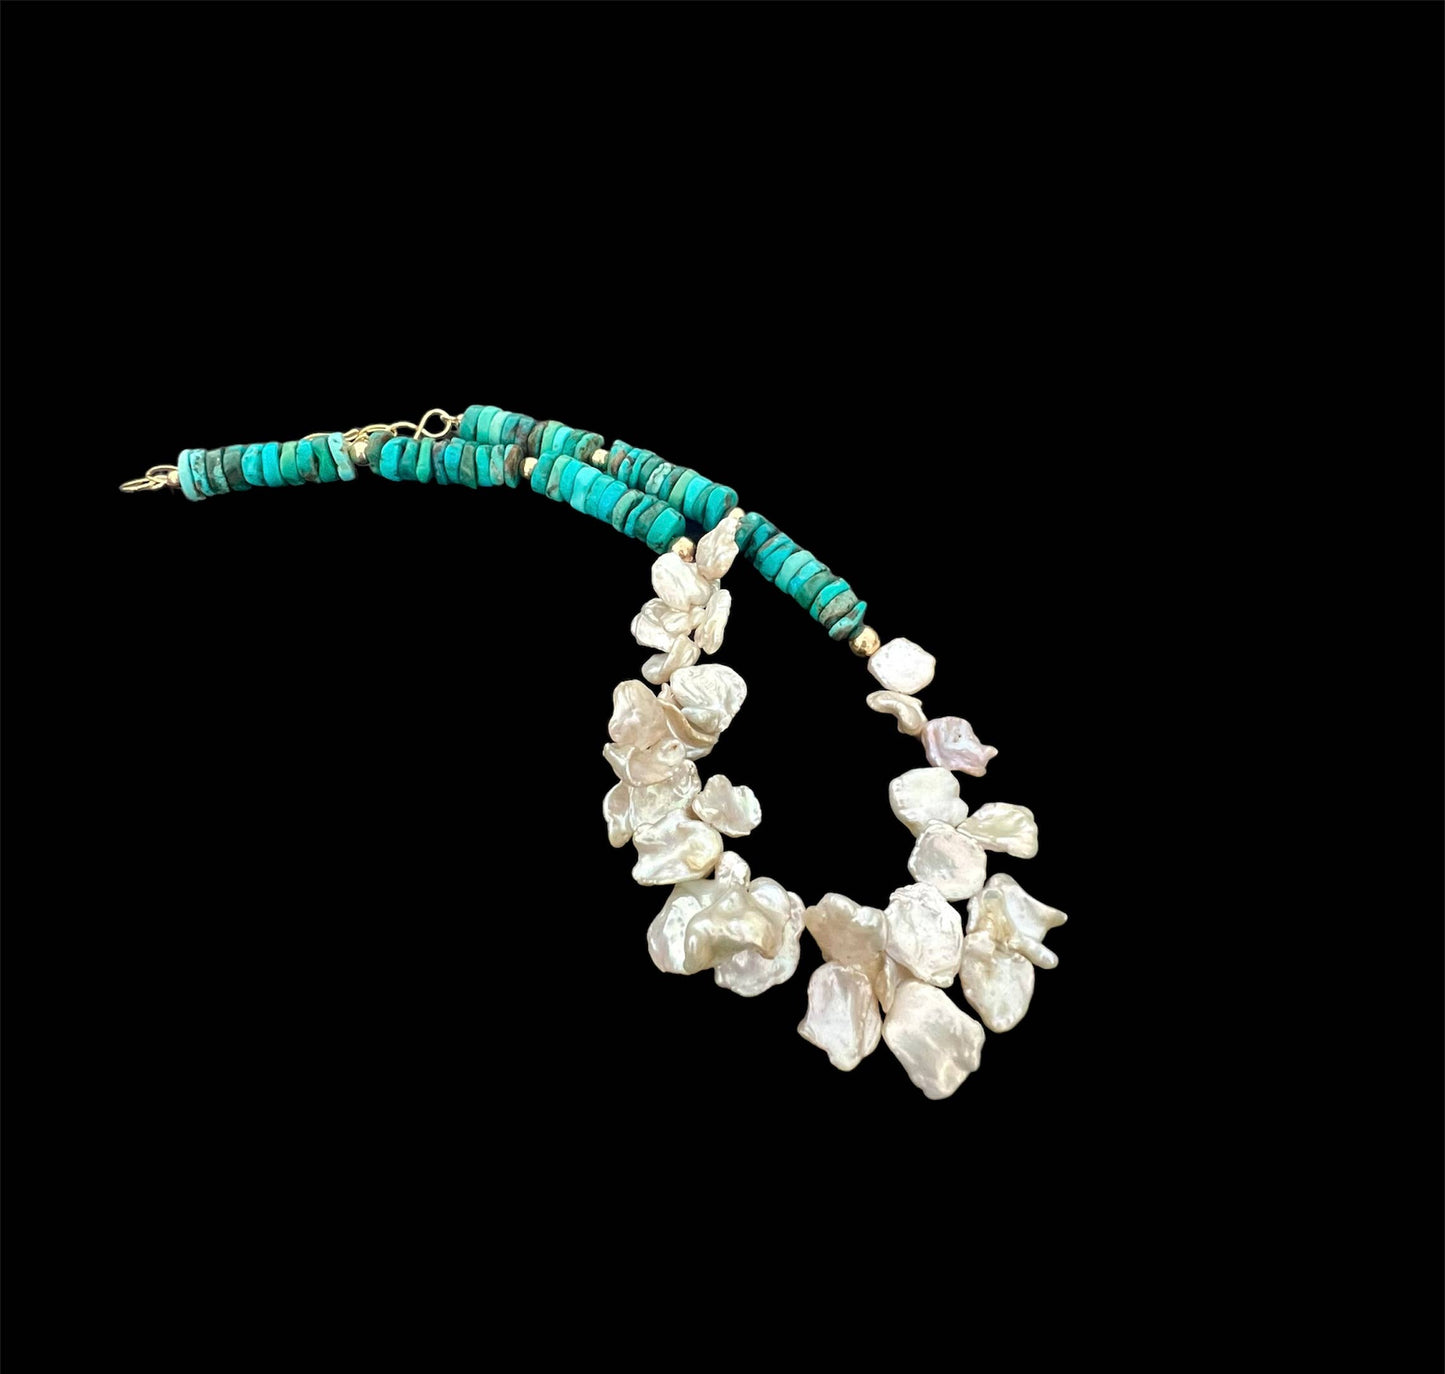 Diana Wingert Jewelry- Turquoise and Keshi pearl necklace